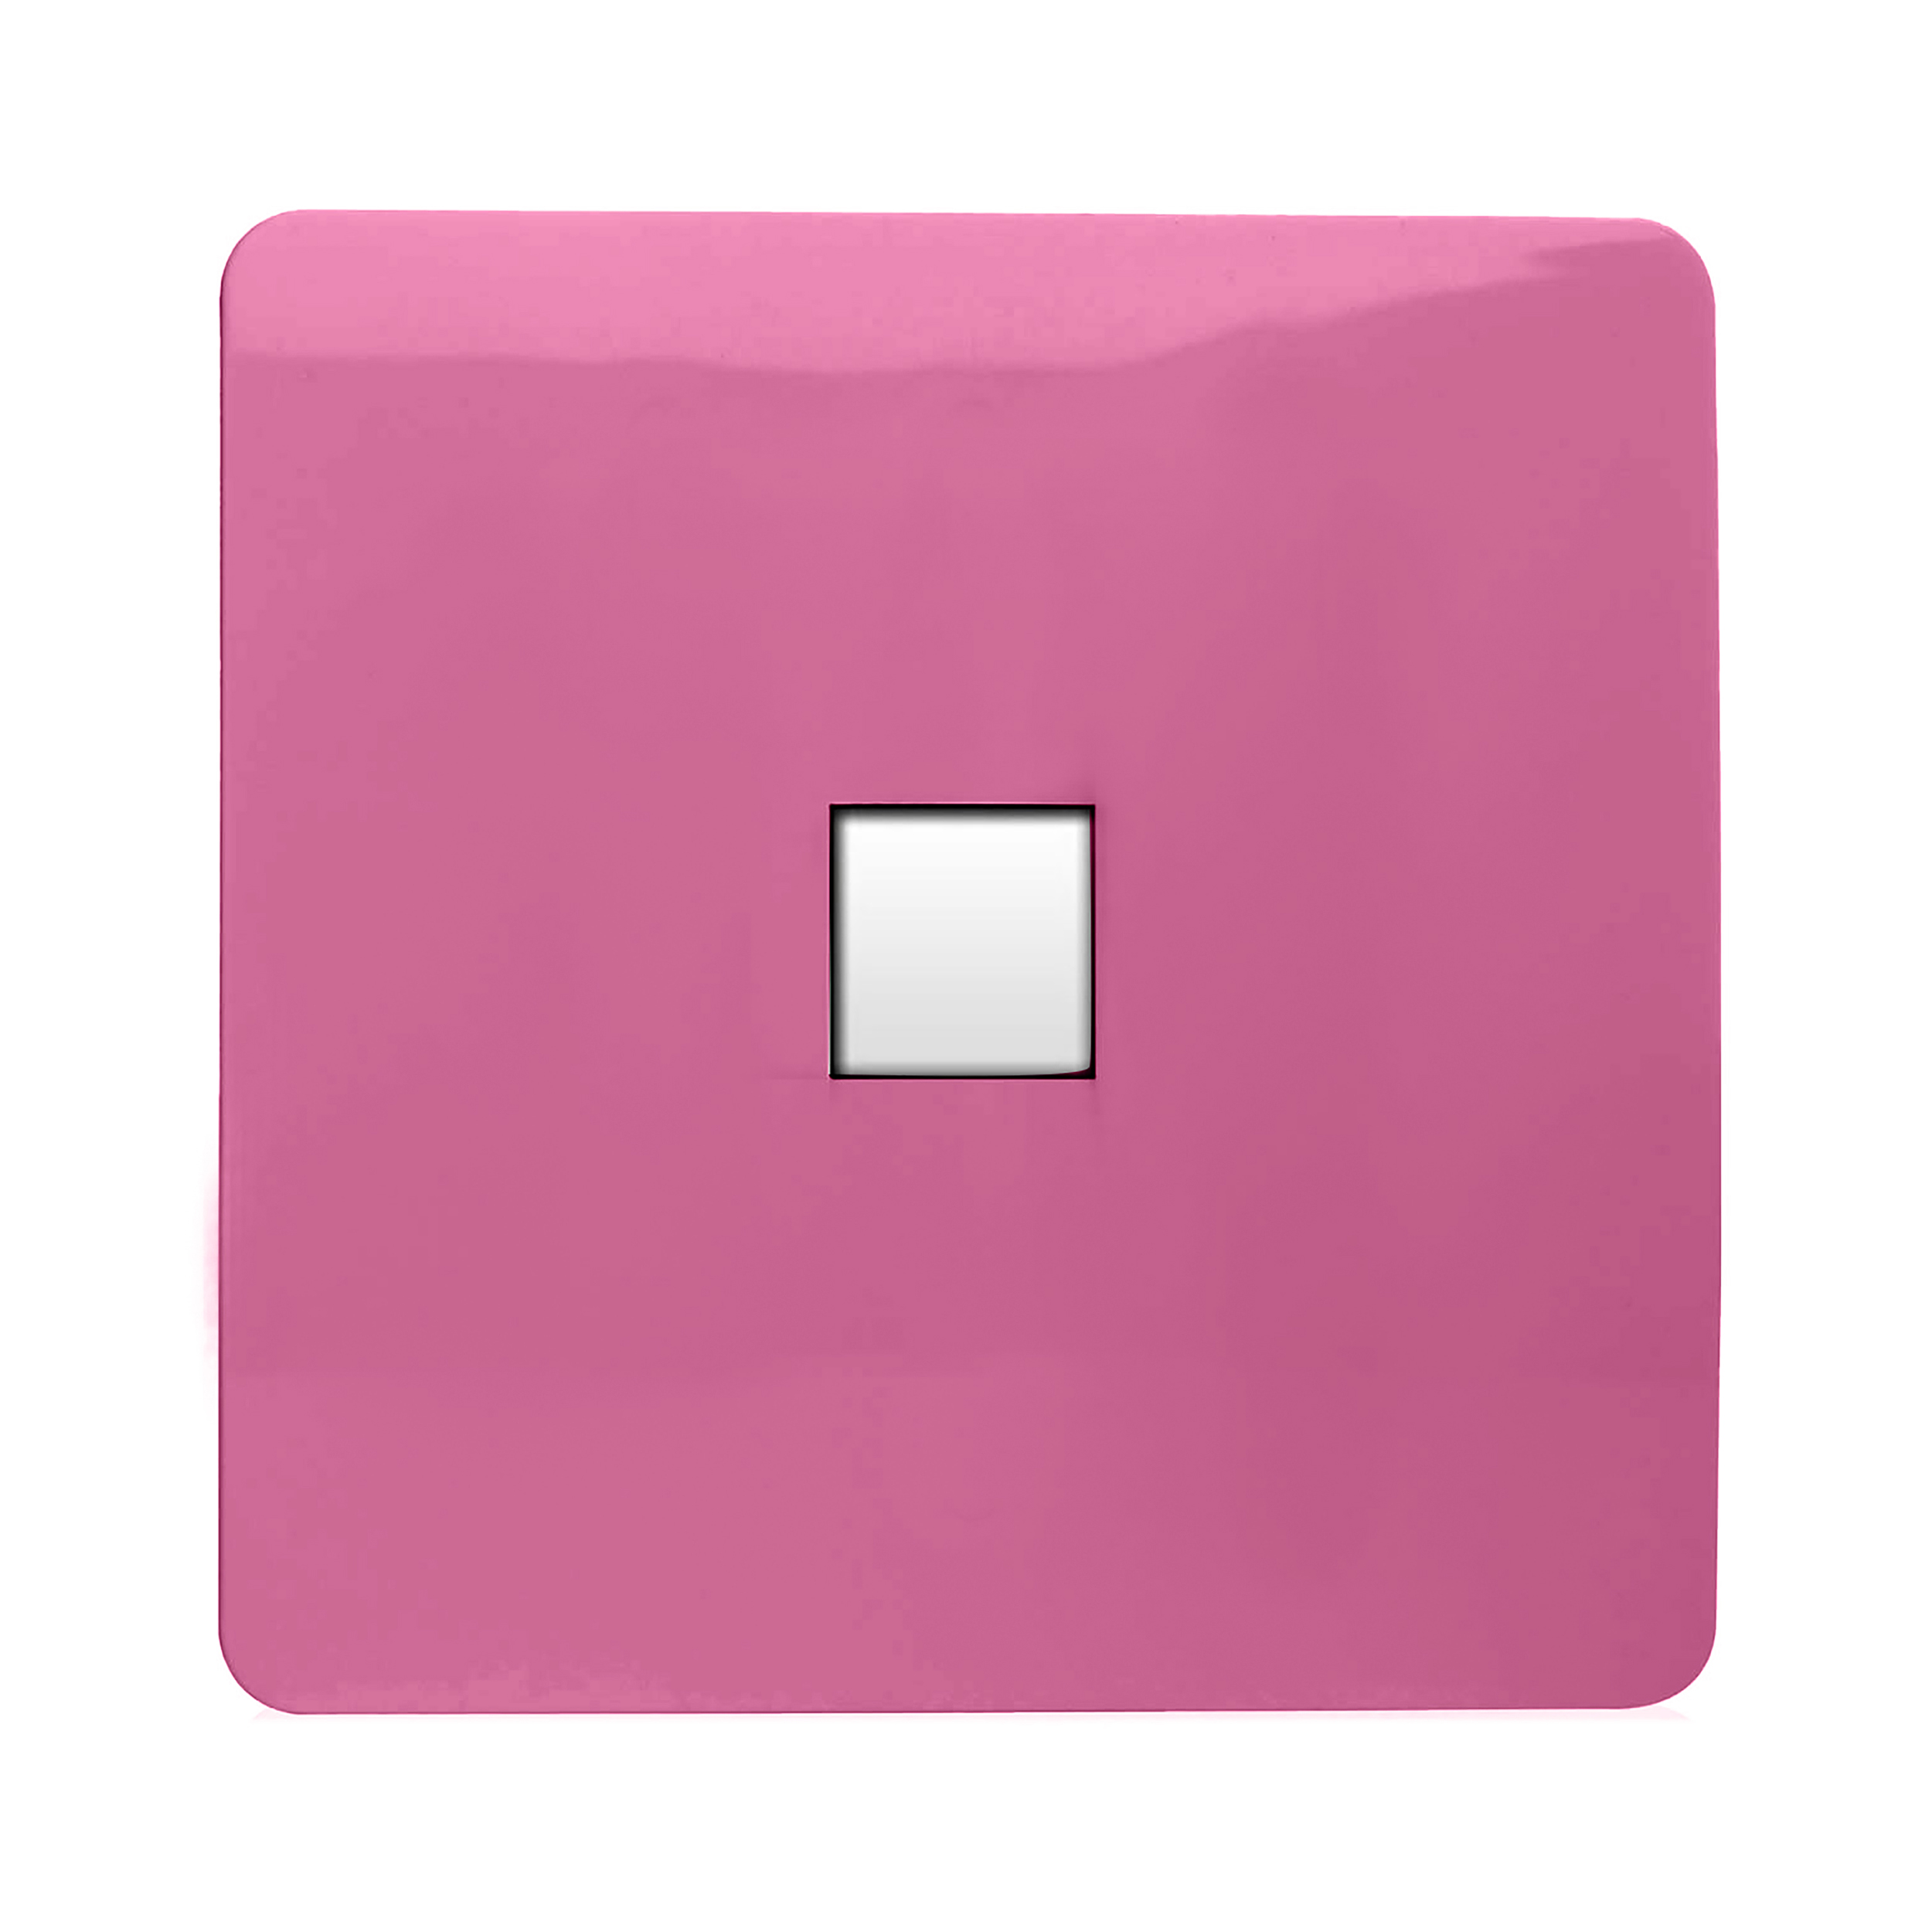 ART-PCPK  Single PC Ethernet Cat 5 & 6 Data Outlet Pink